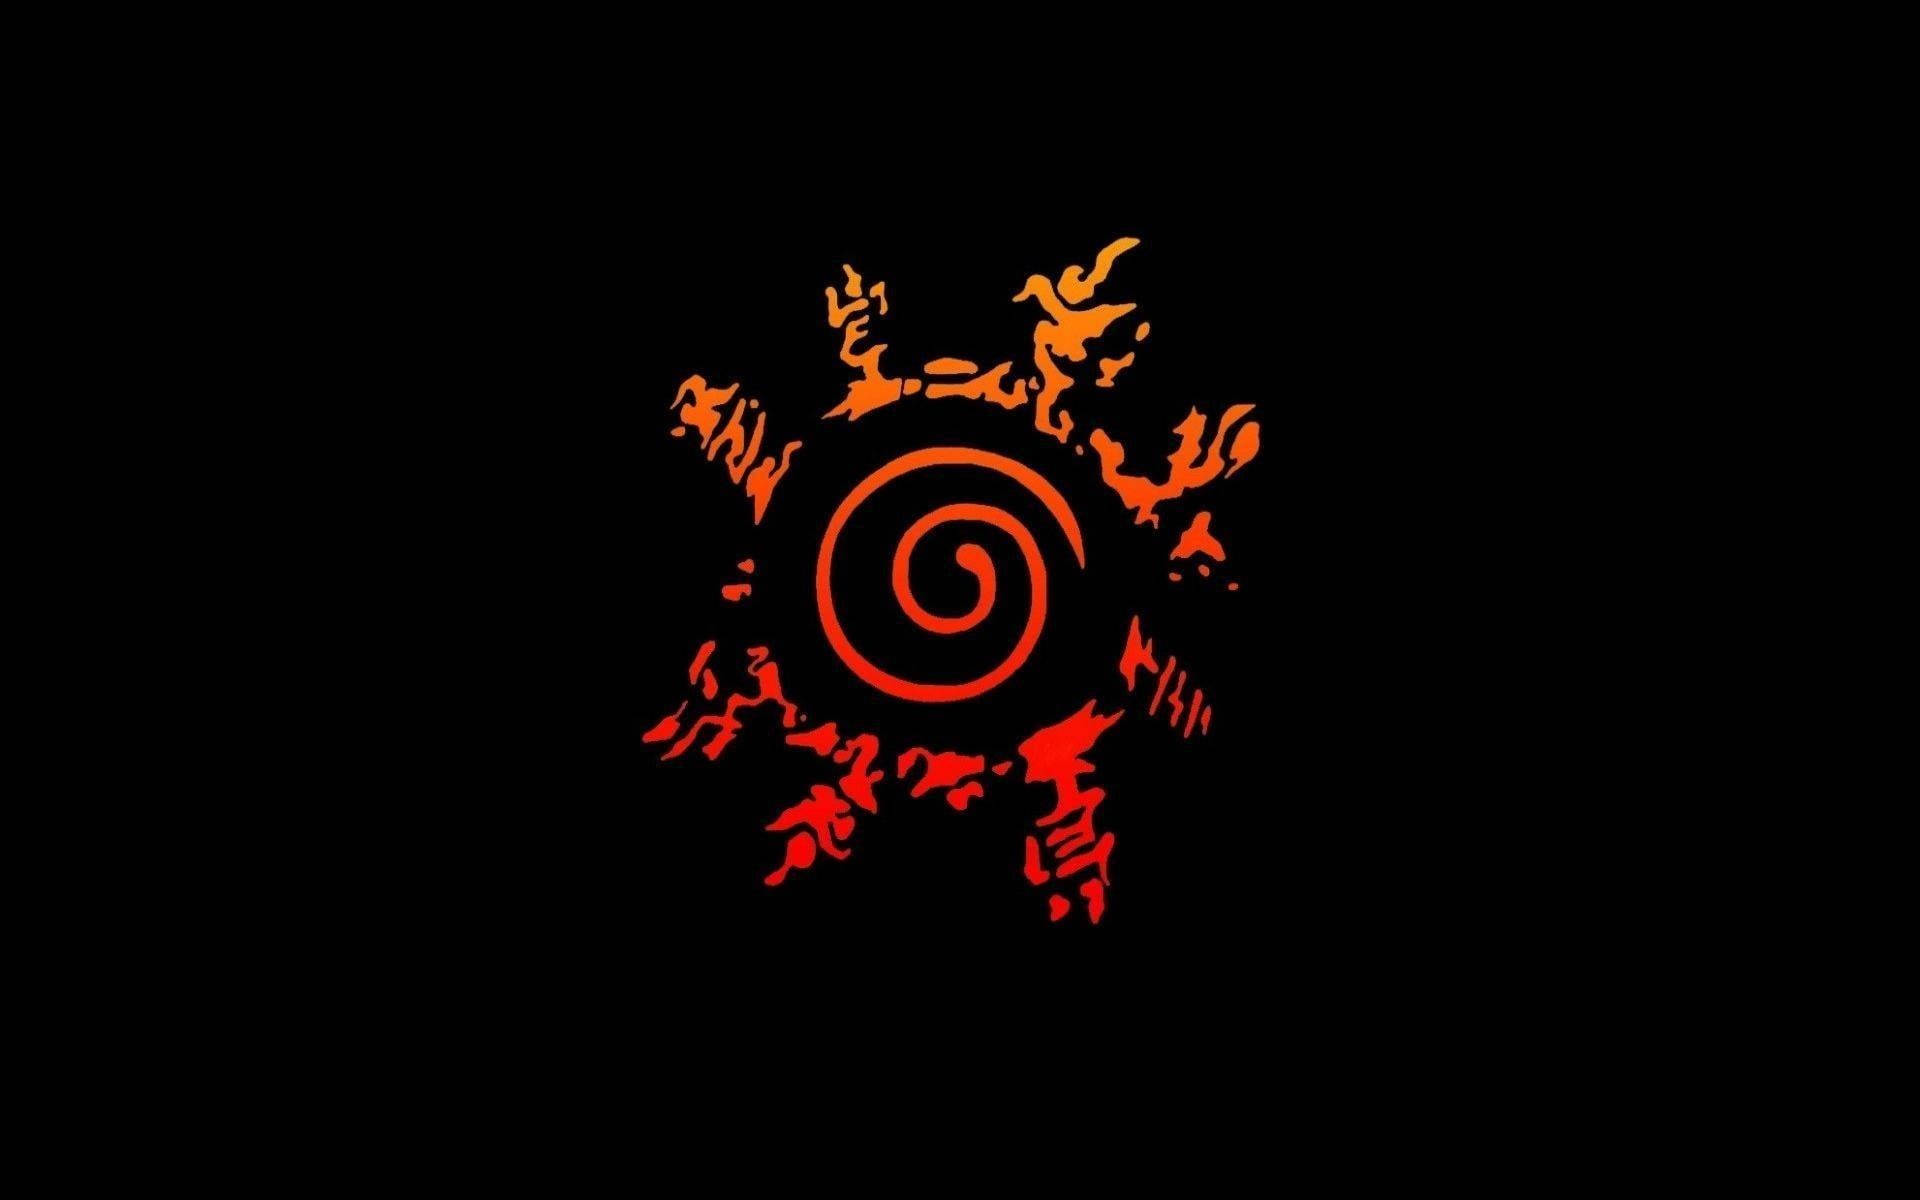 Naruto Symbol With Japanese Words Background